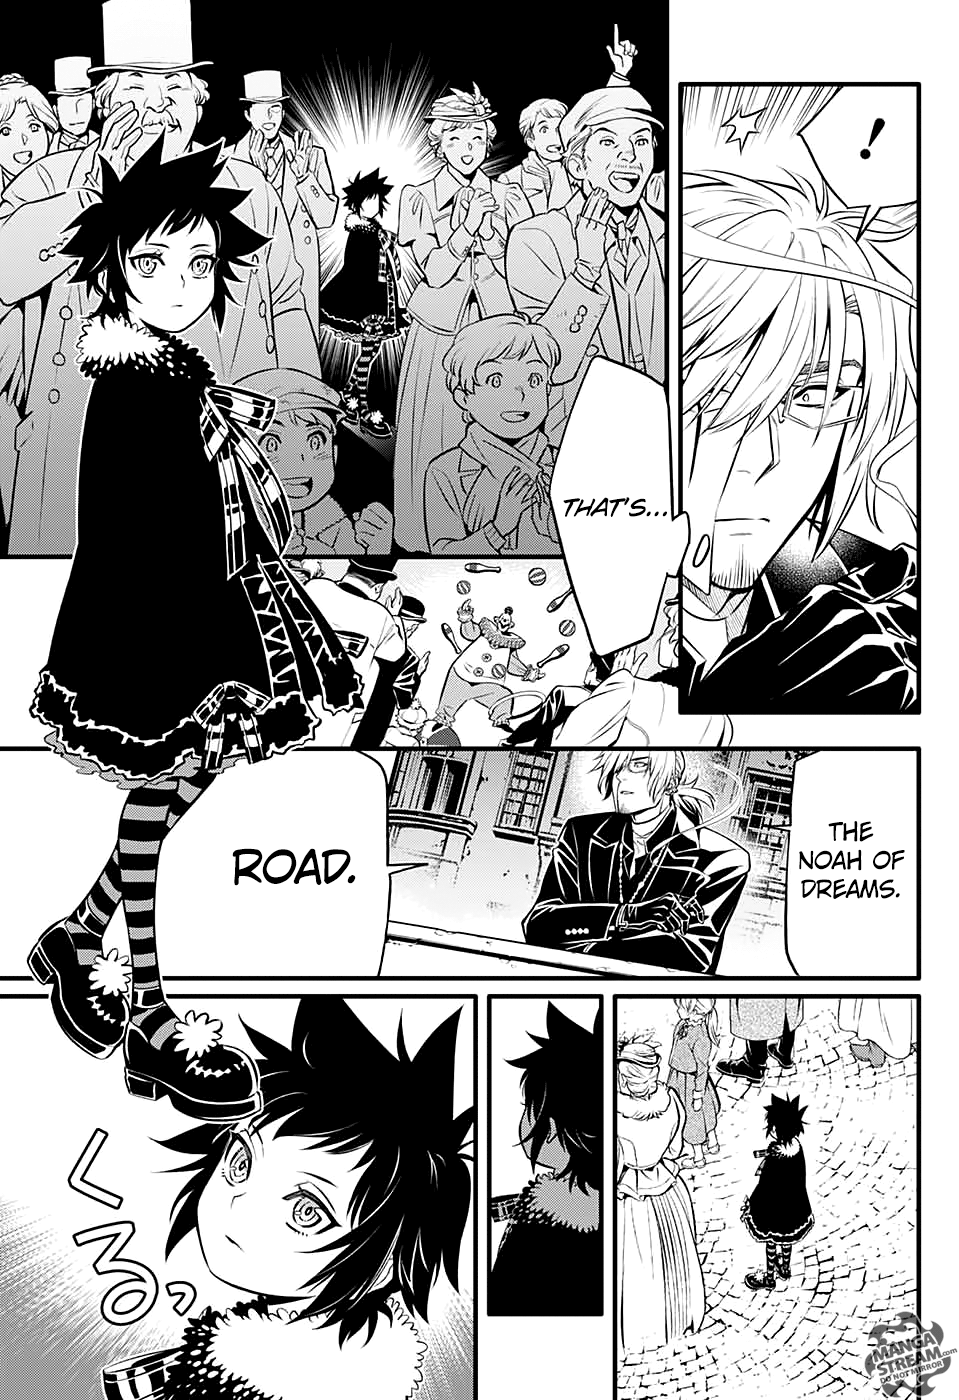 D.Gray-man chapter 234 page 9